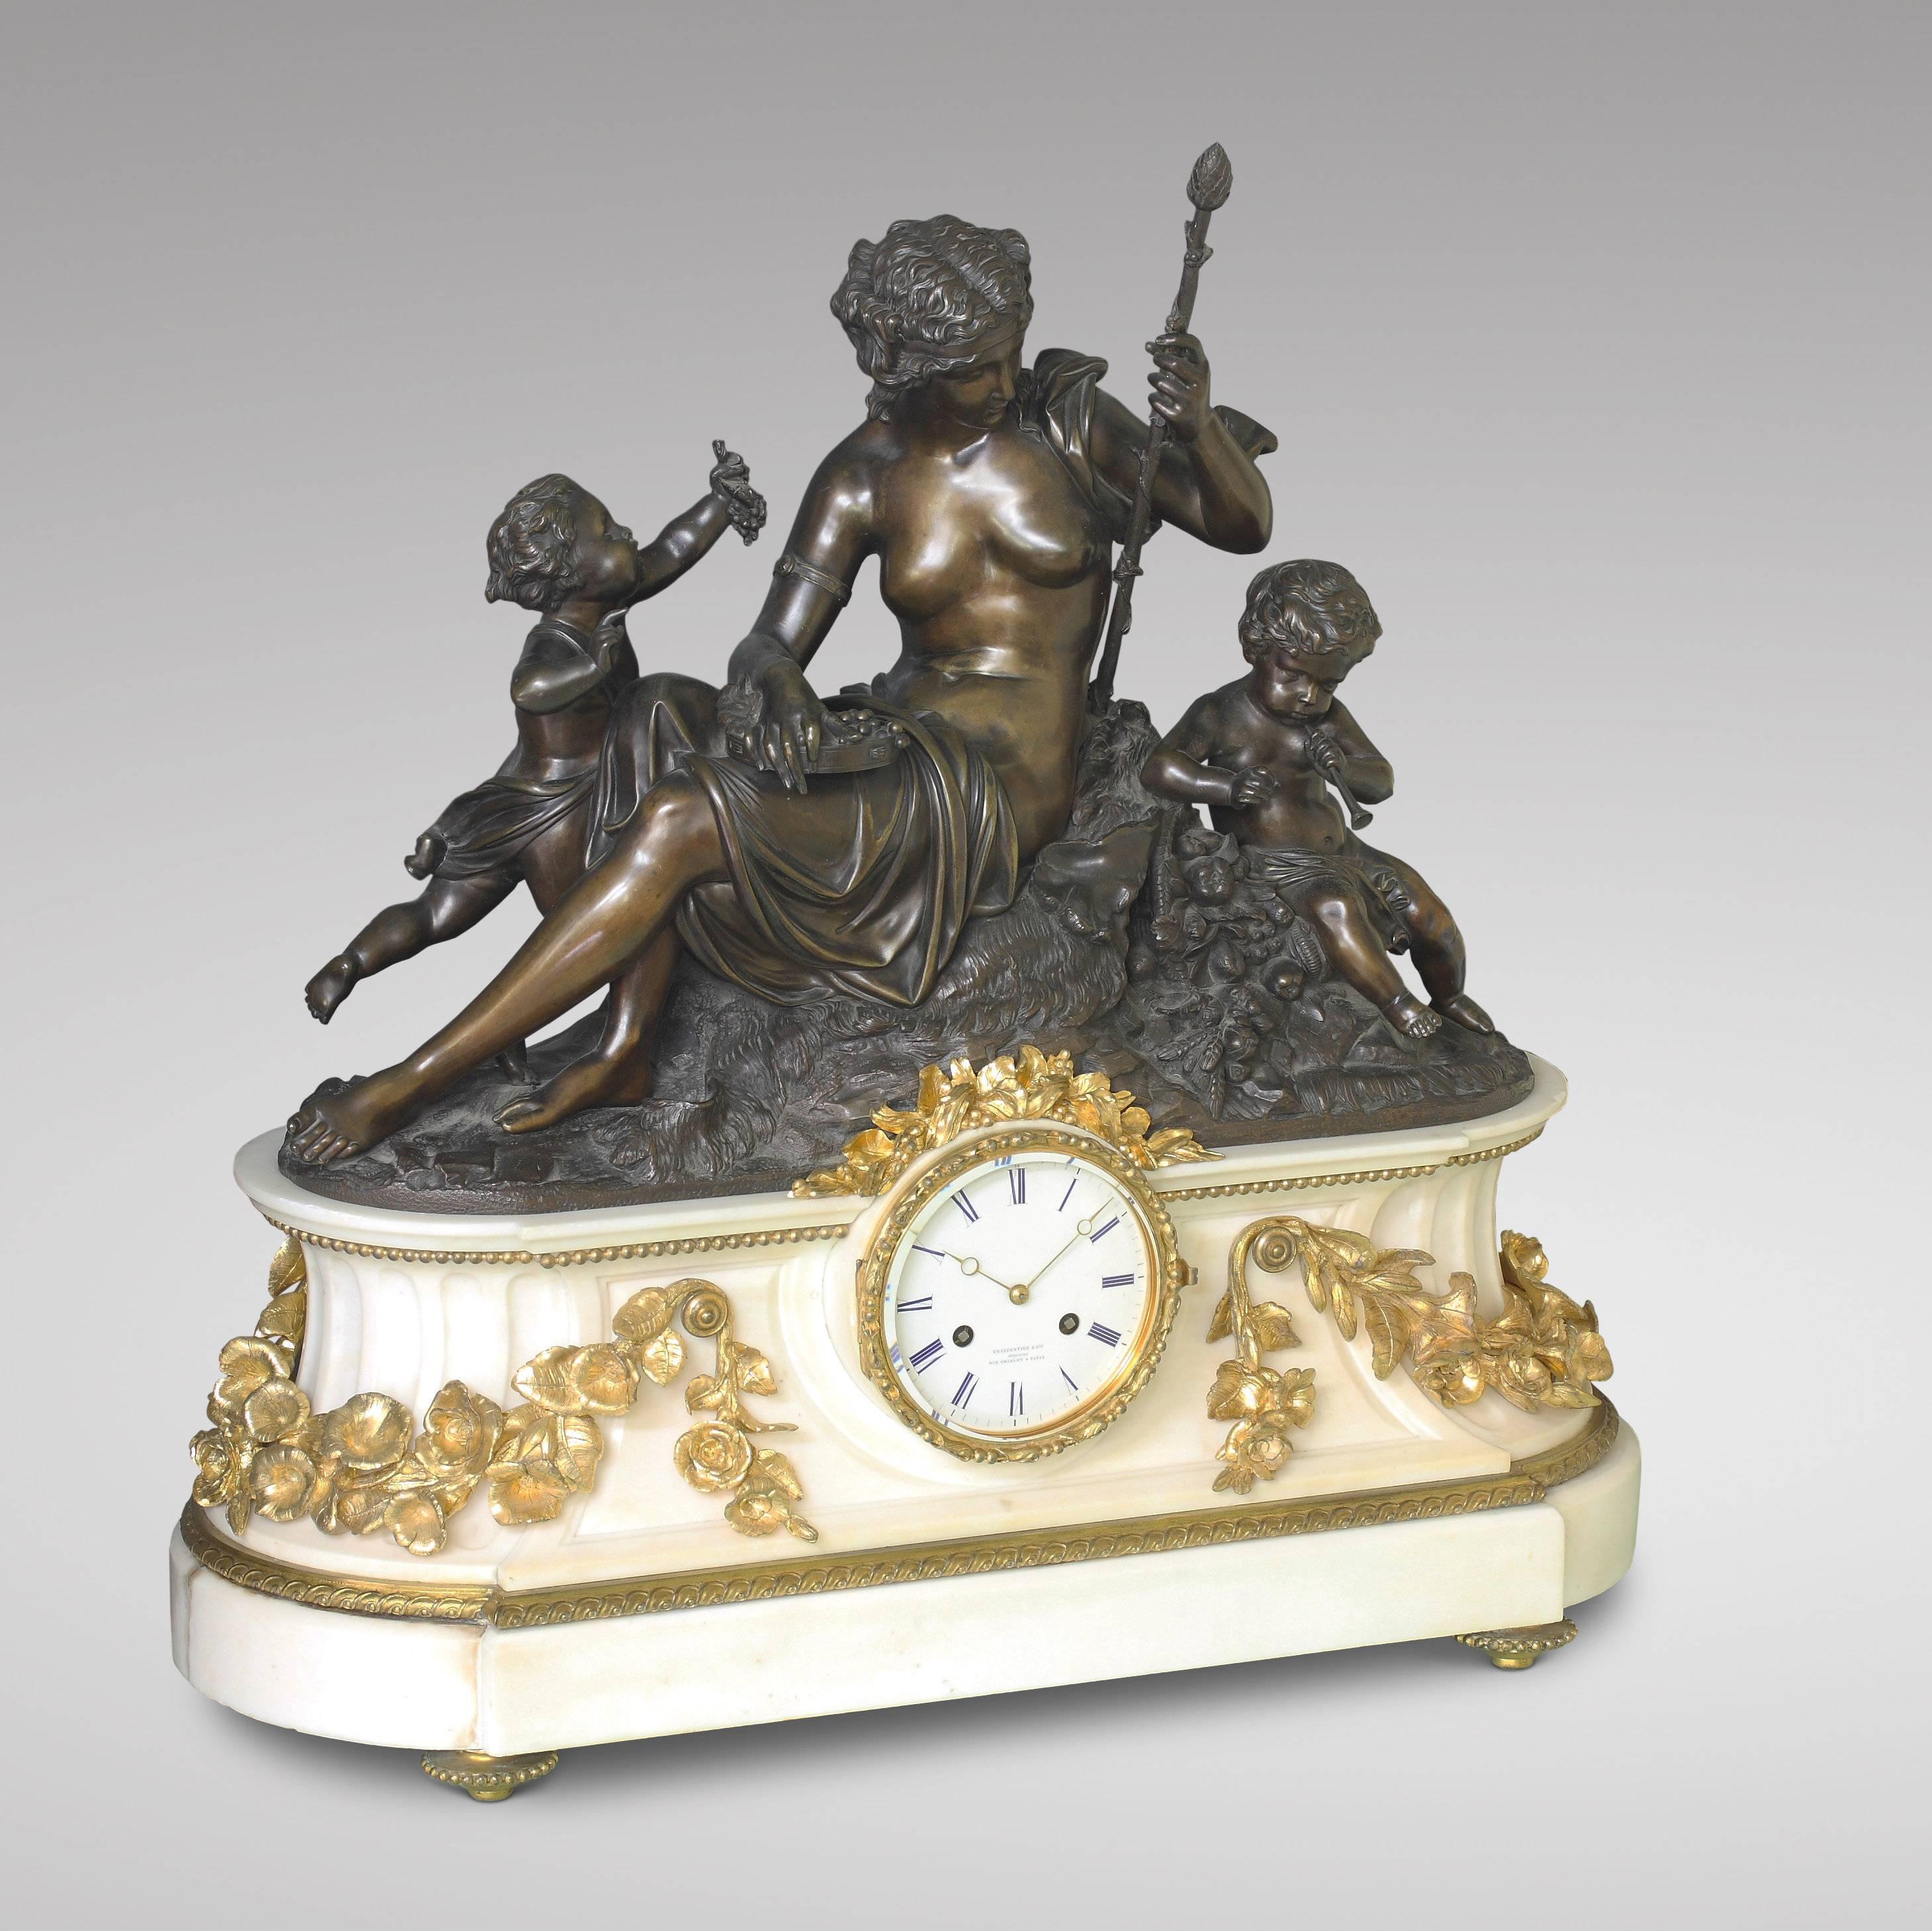 Large patinated bronze group with a sitting bacchante and two putti, one offering a bunch of grapes and the other playing a flute. Imposing white marble base decorated with gilded flower garlands on four ormolu toupee feet, with an enamel dial